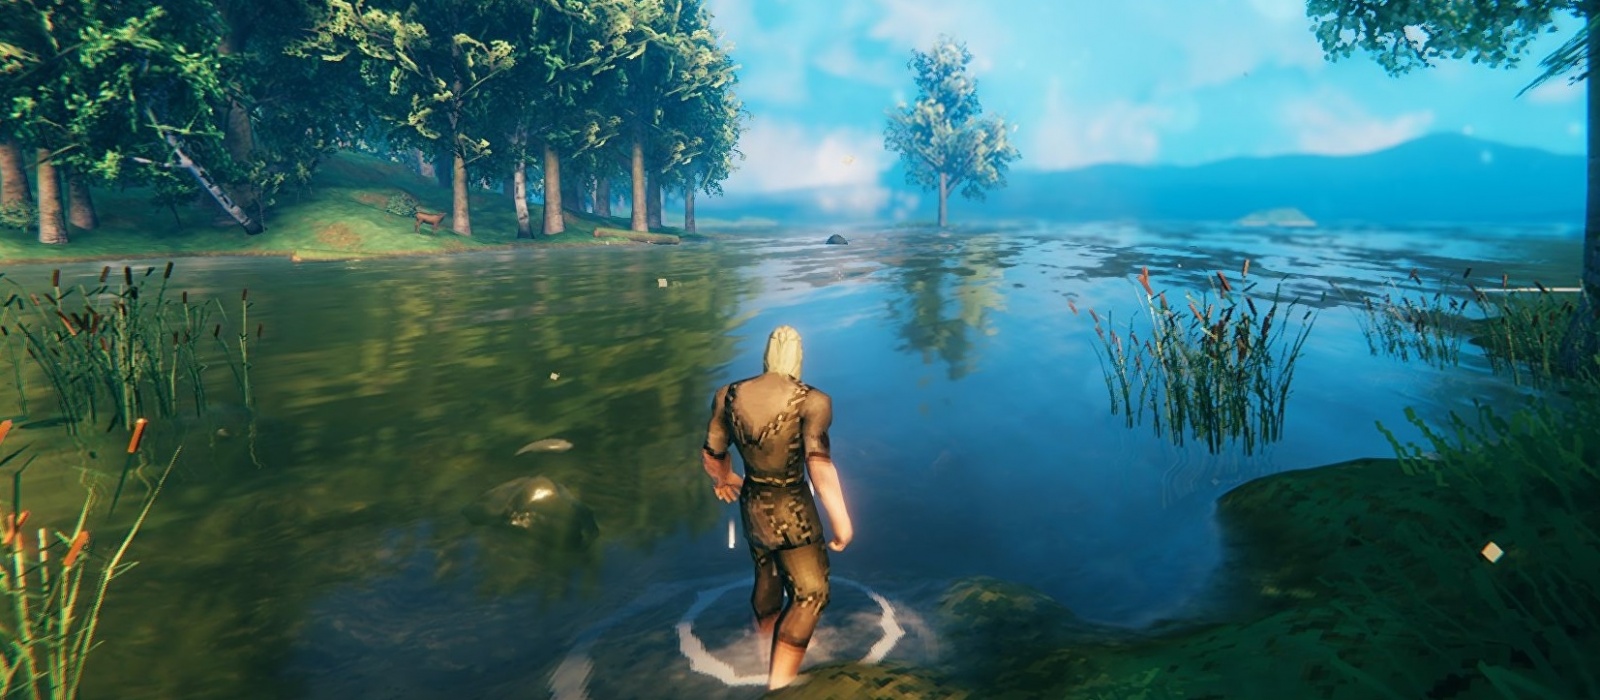 How to quickly pump the following skills in Valheim: "no weapons", axes, swords, clubs, knives, spears, polearms, bows, picks, swimming, running and jumping